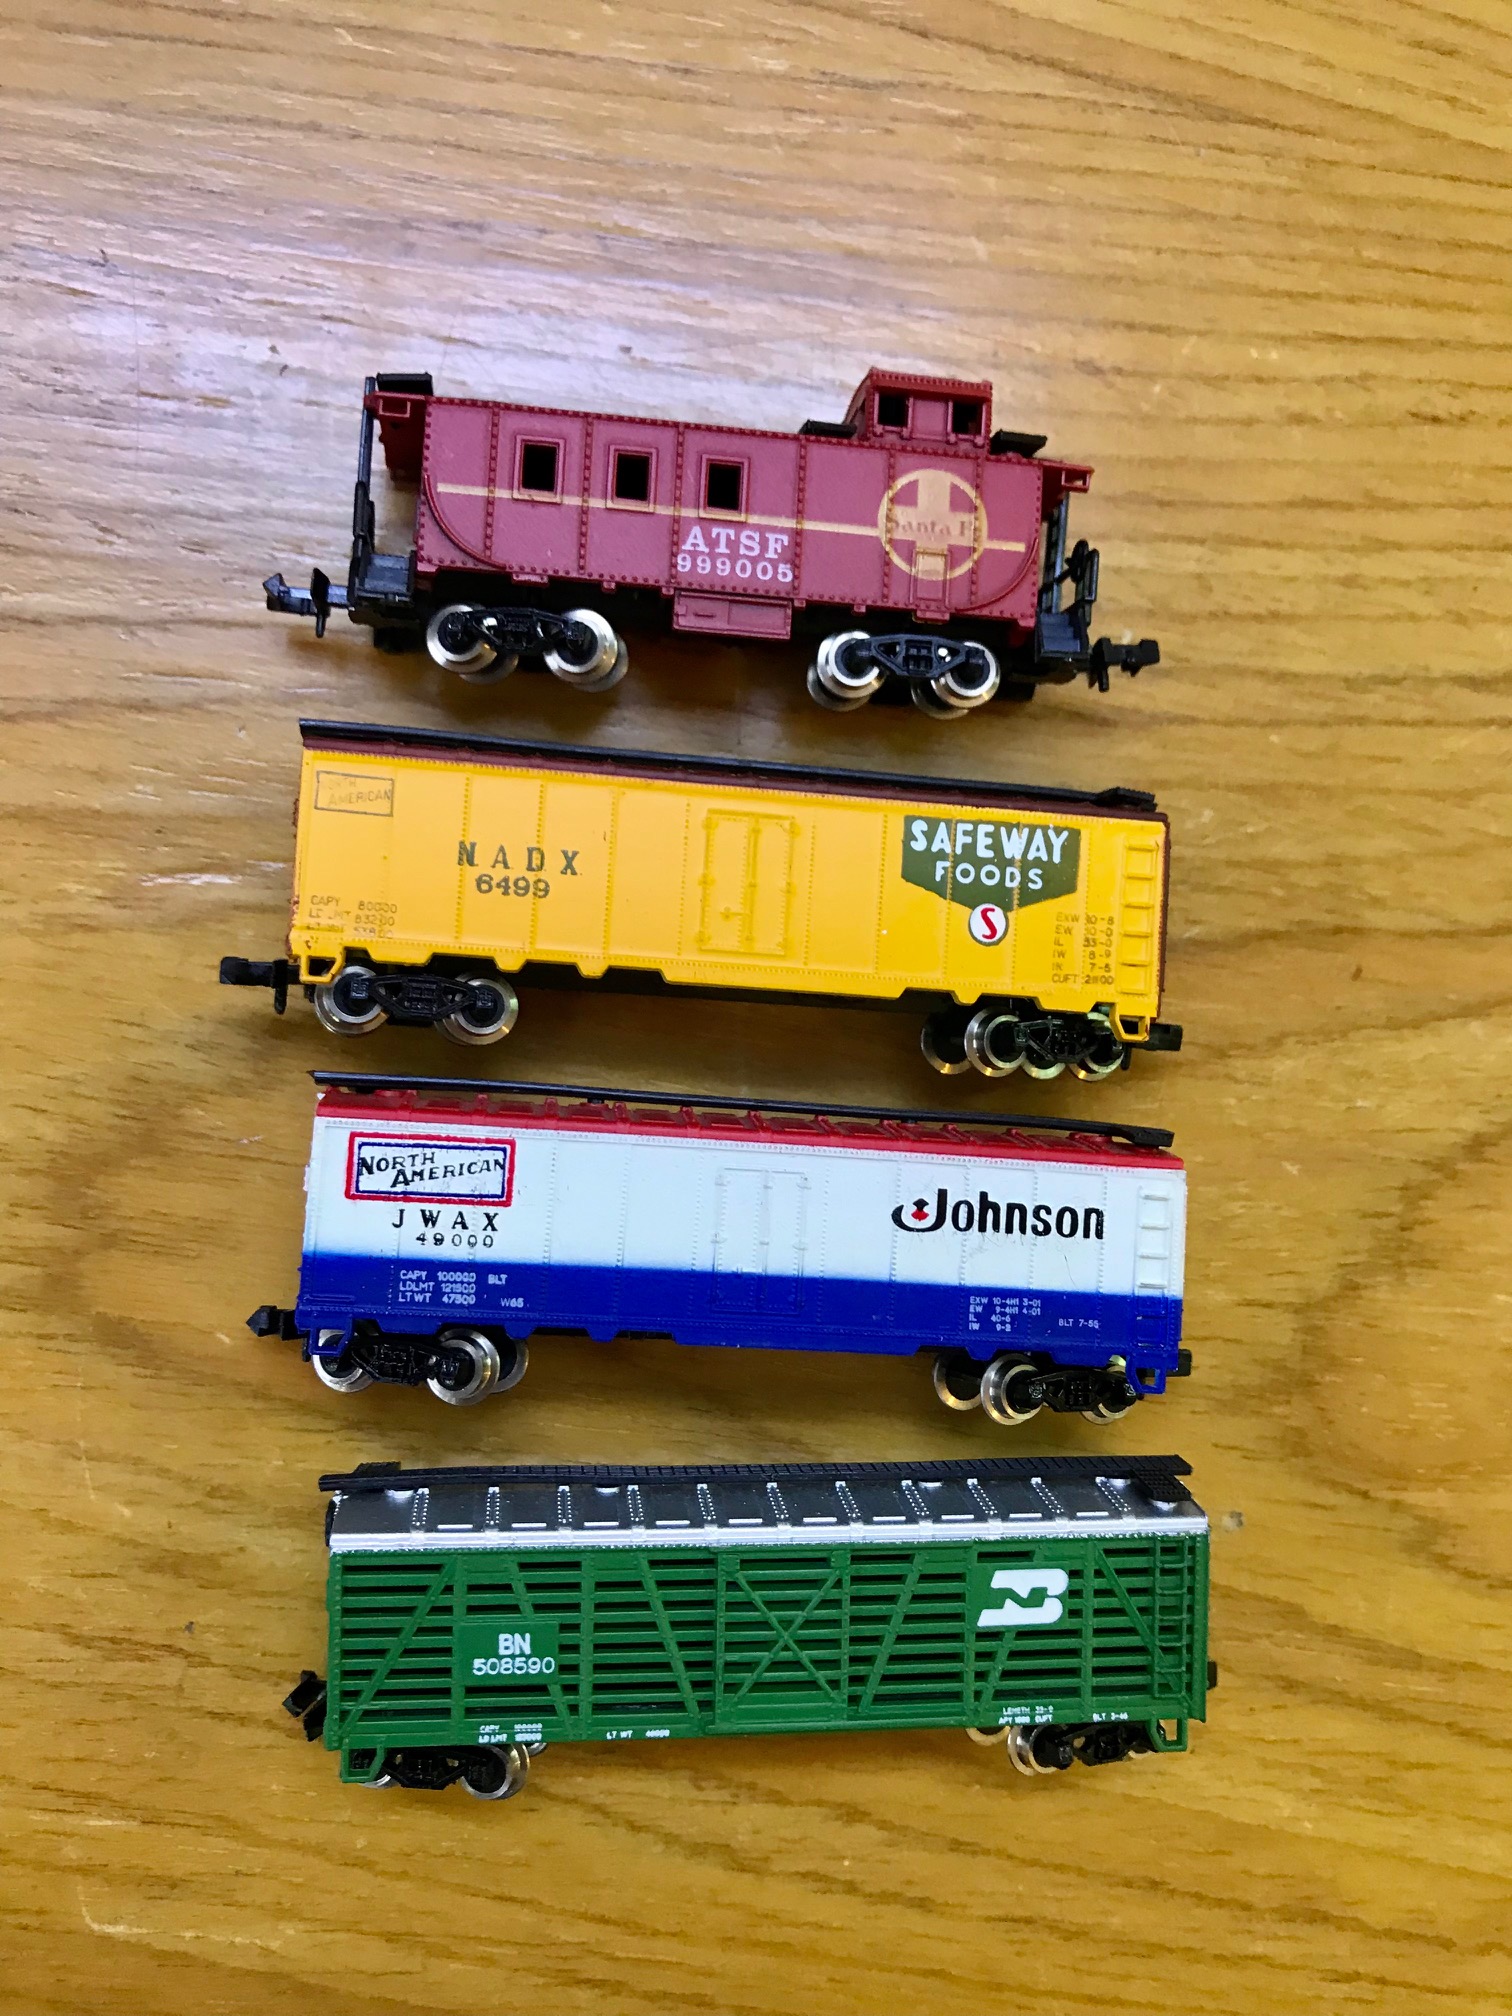 Brand new Bachmann N Scale 3 Wagons 1 Caboose    Bachmann N Scale 3 Wagons 1 Caboose ใหม่ล่าสุด